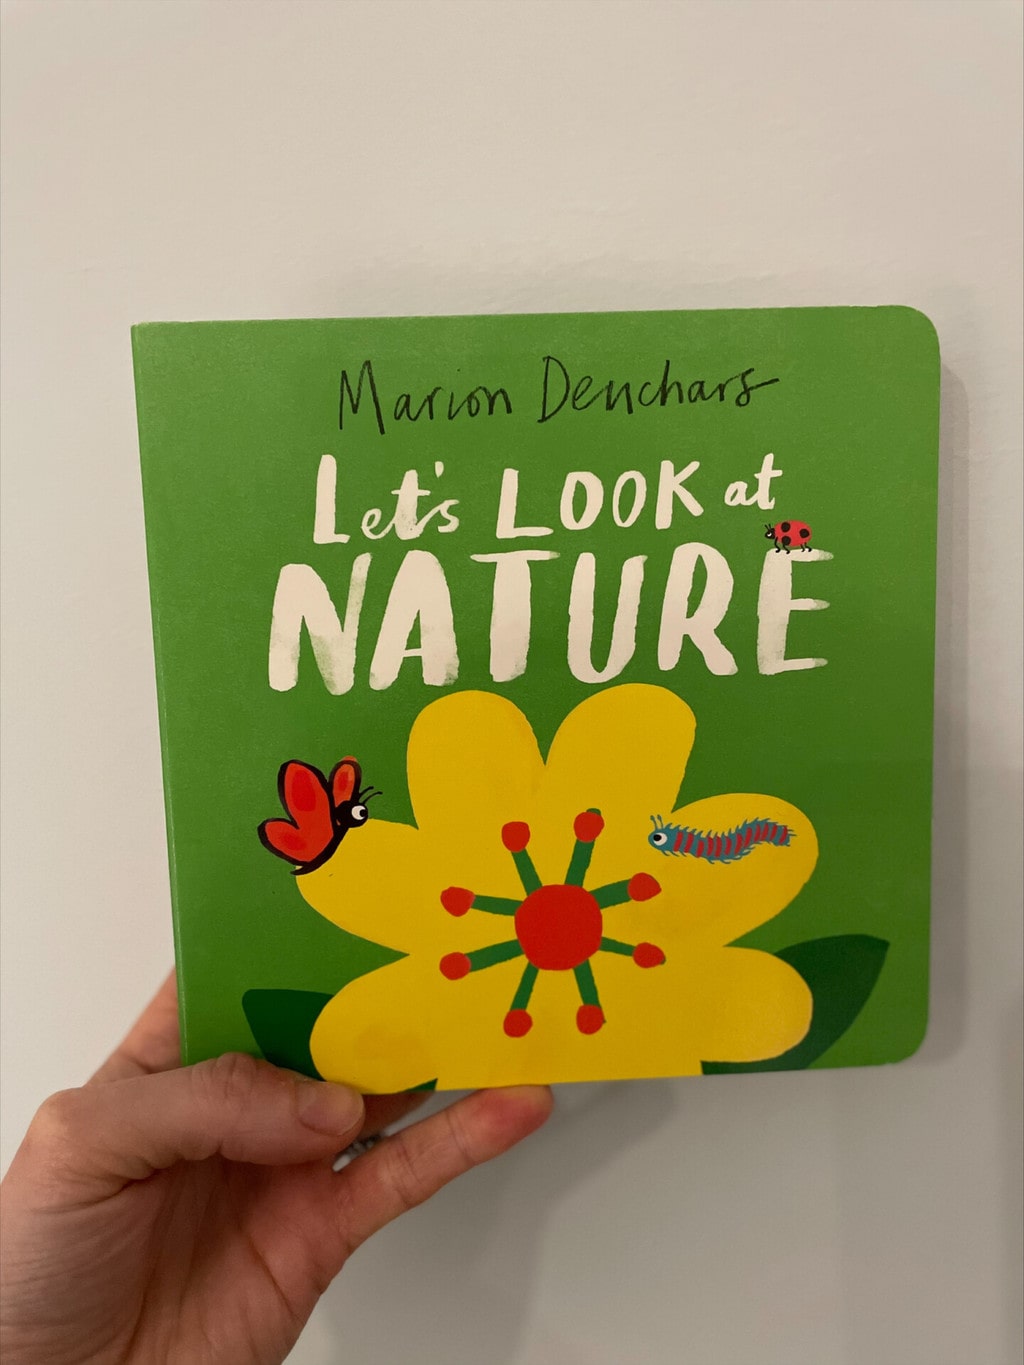 Let’s Look at Nature – Marion Deuchars (author and illustrator), Laurence King Publishing (imprint of Hachette)